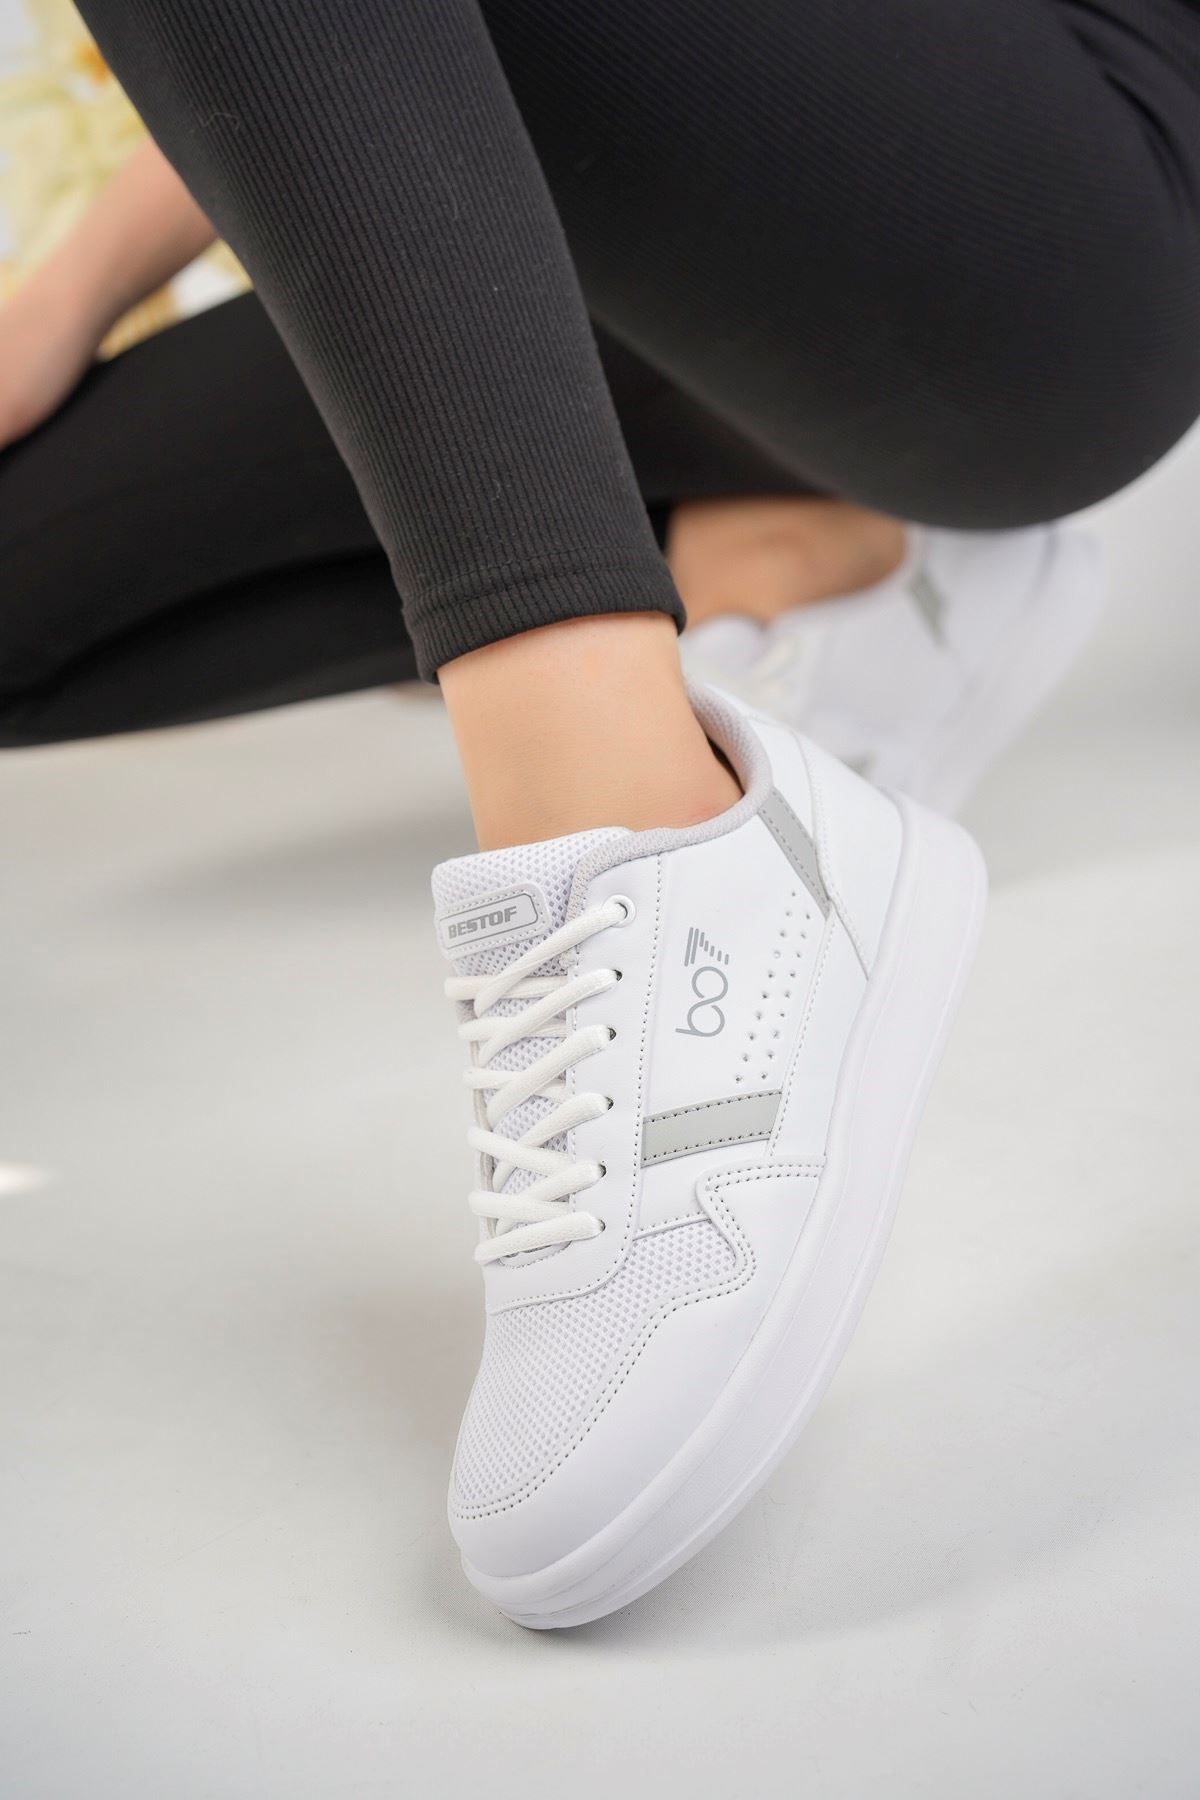 Lace-up White Women's Sneakers